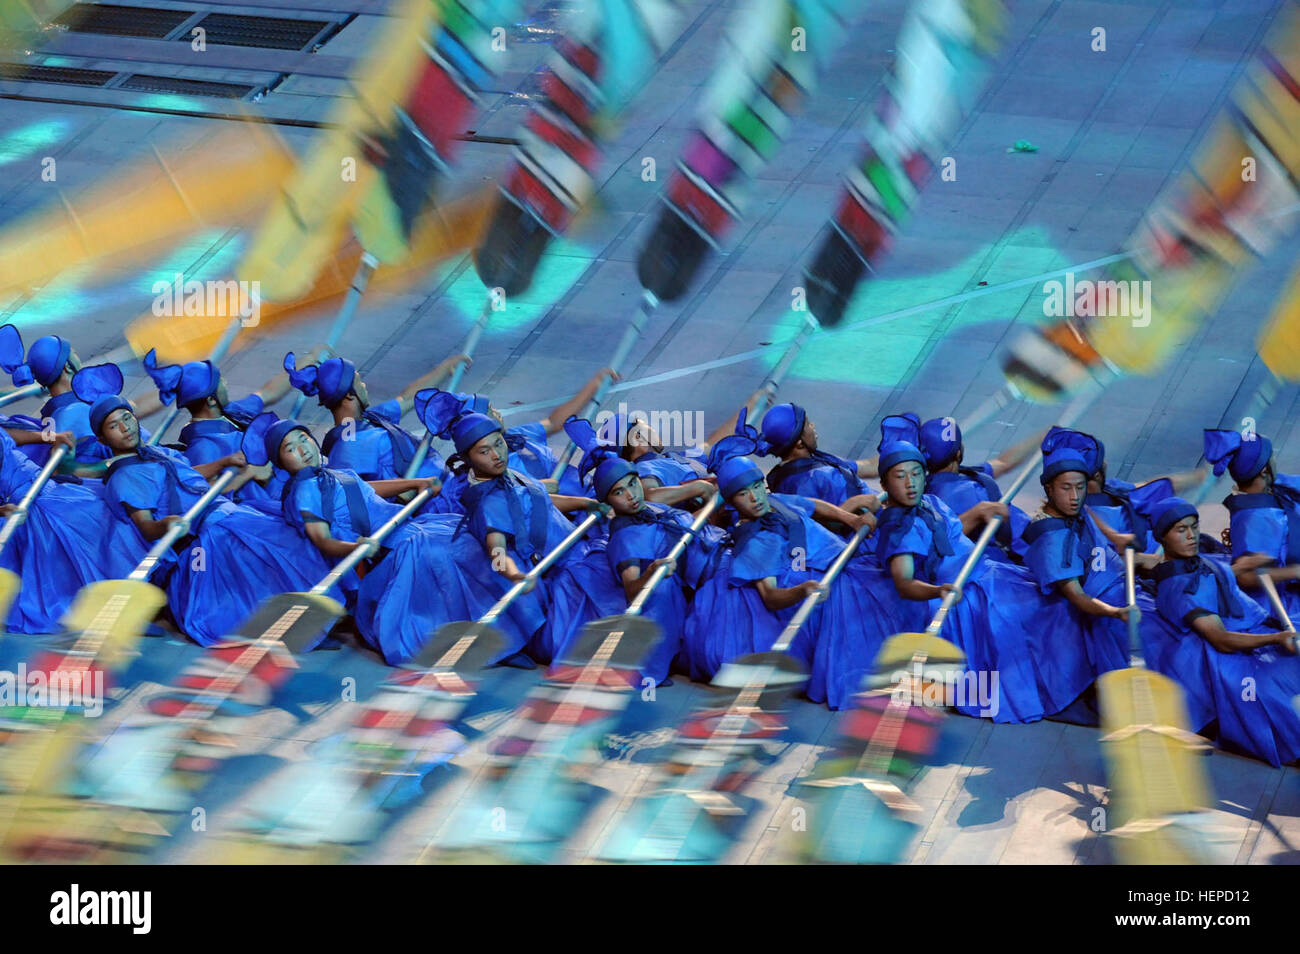 Rowers during 2008 Summer Olympics opening ceremony Stock Photo